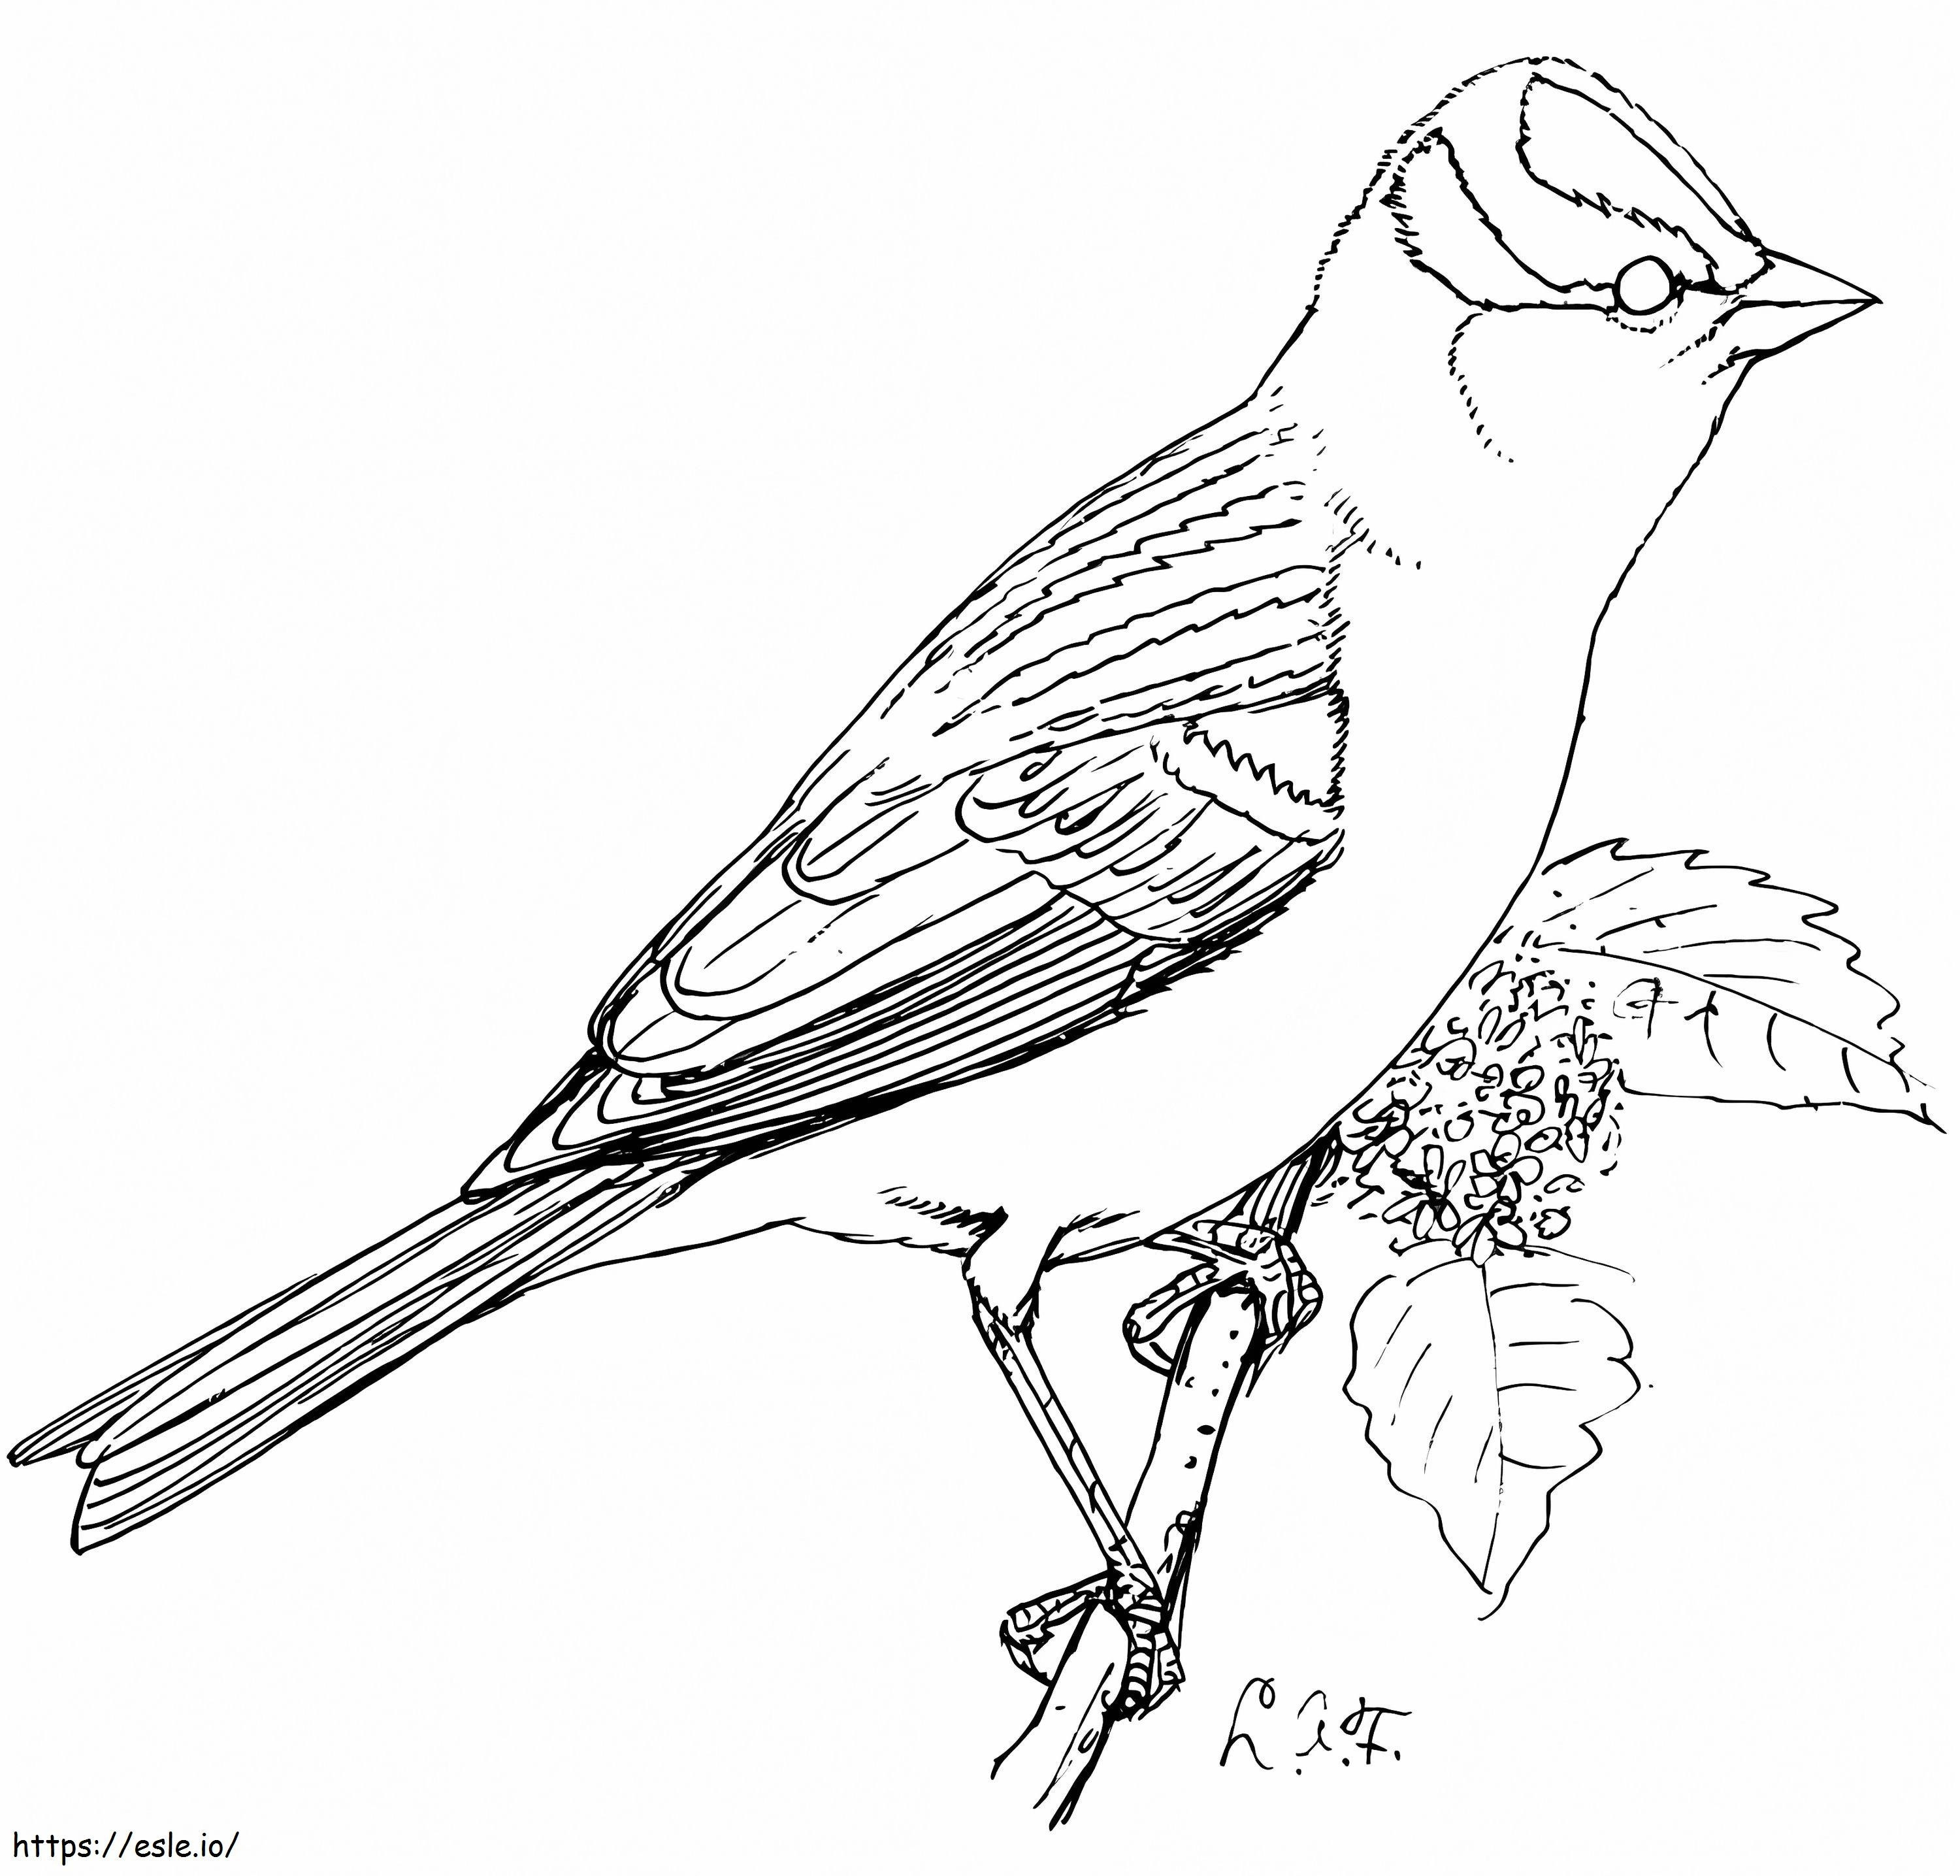 Sparrow On A Branch coloring page